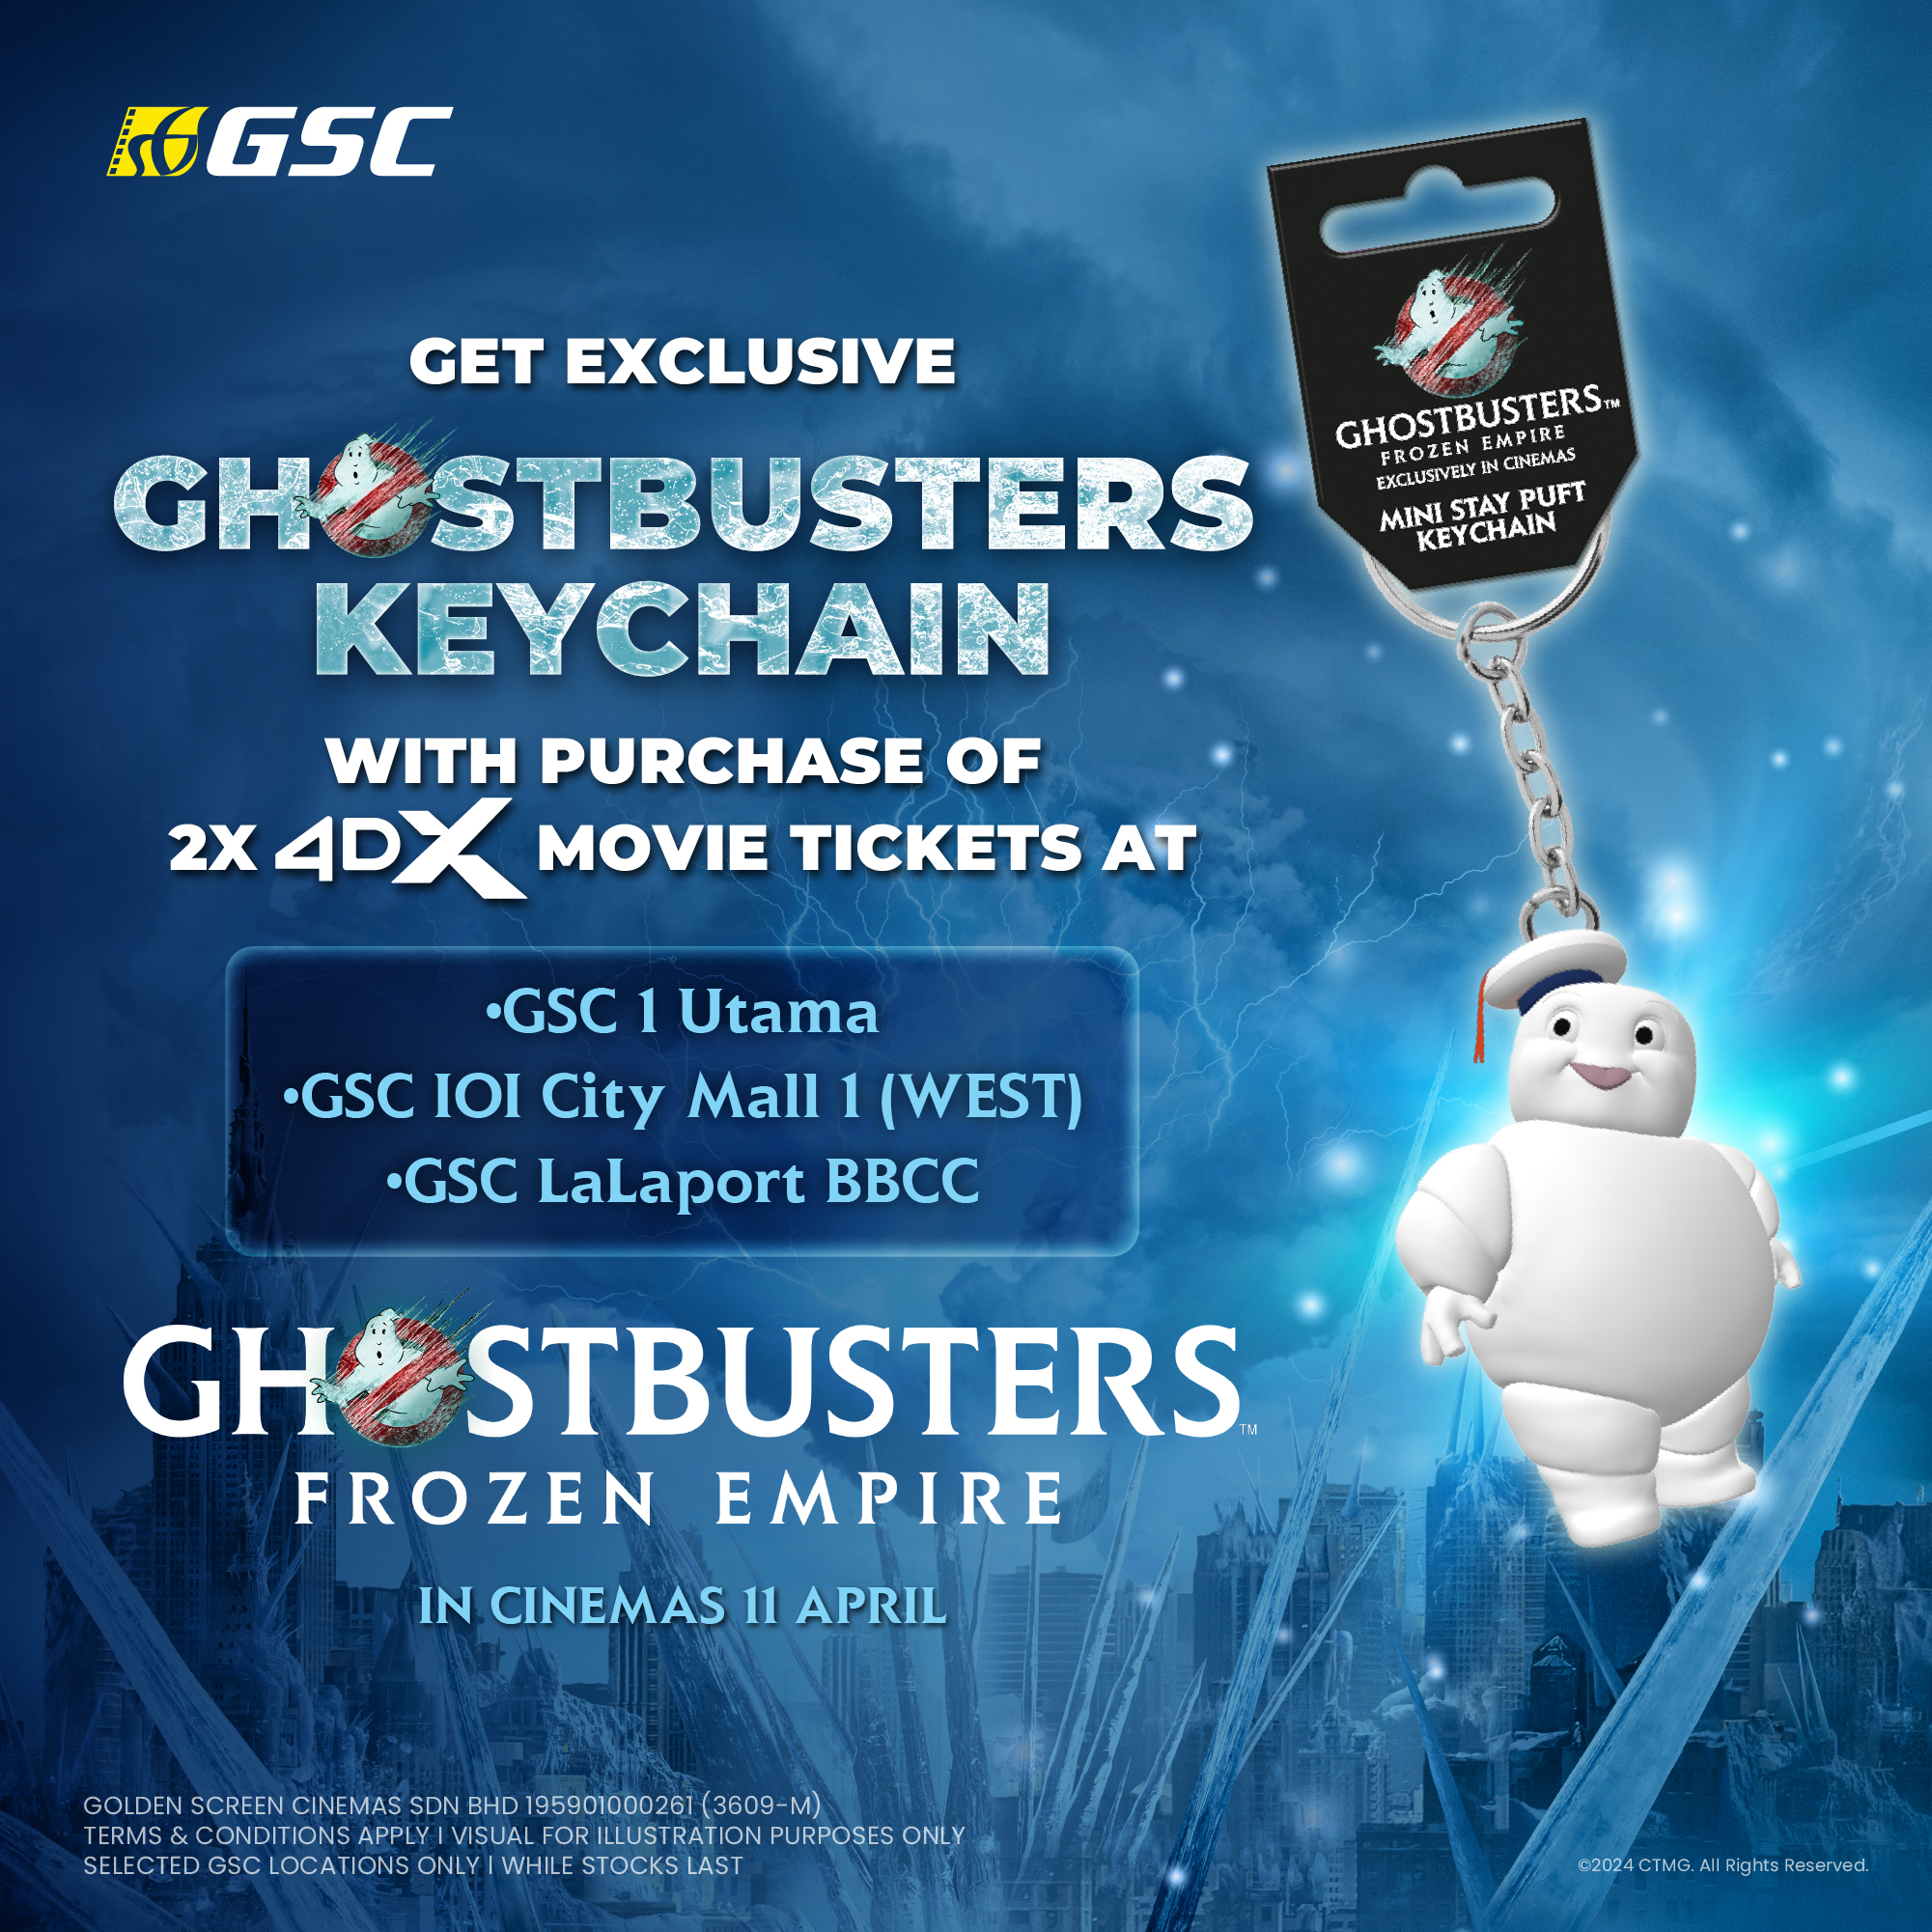 Ghostbusters: The Frozen Empire Keychain Redemption